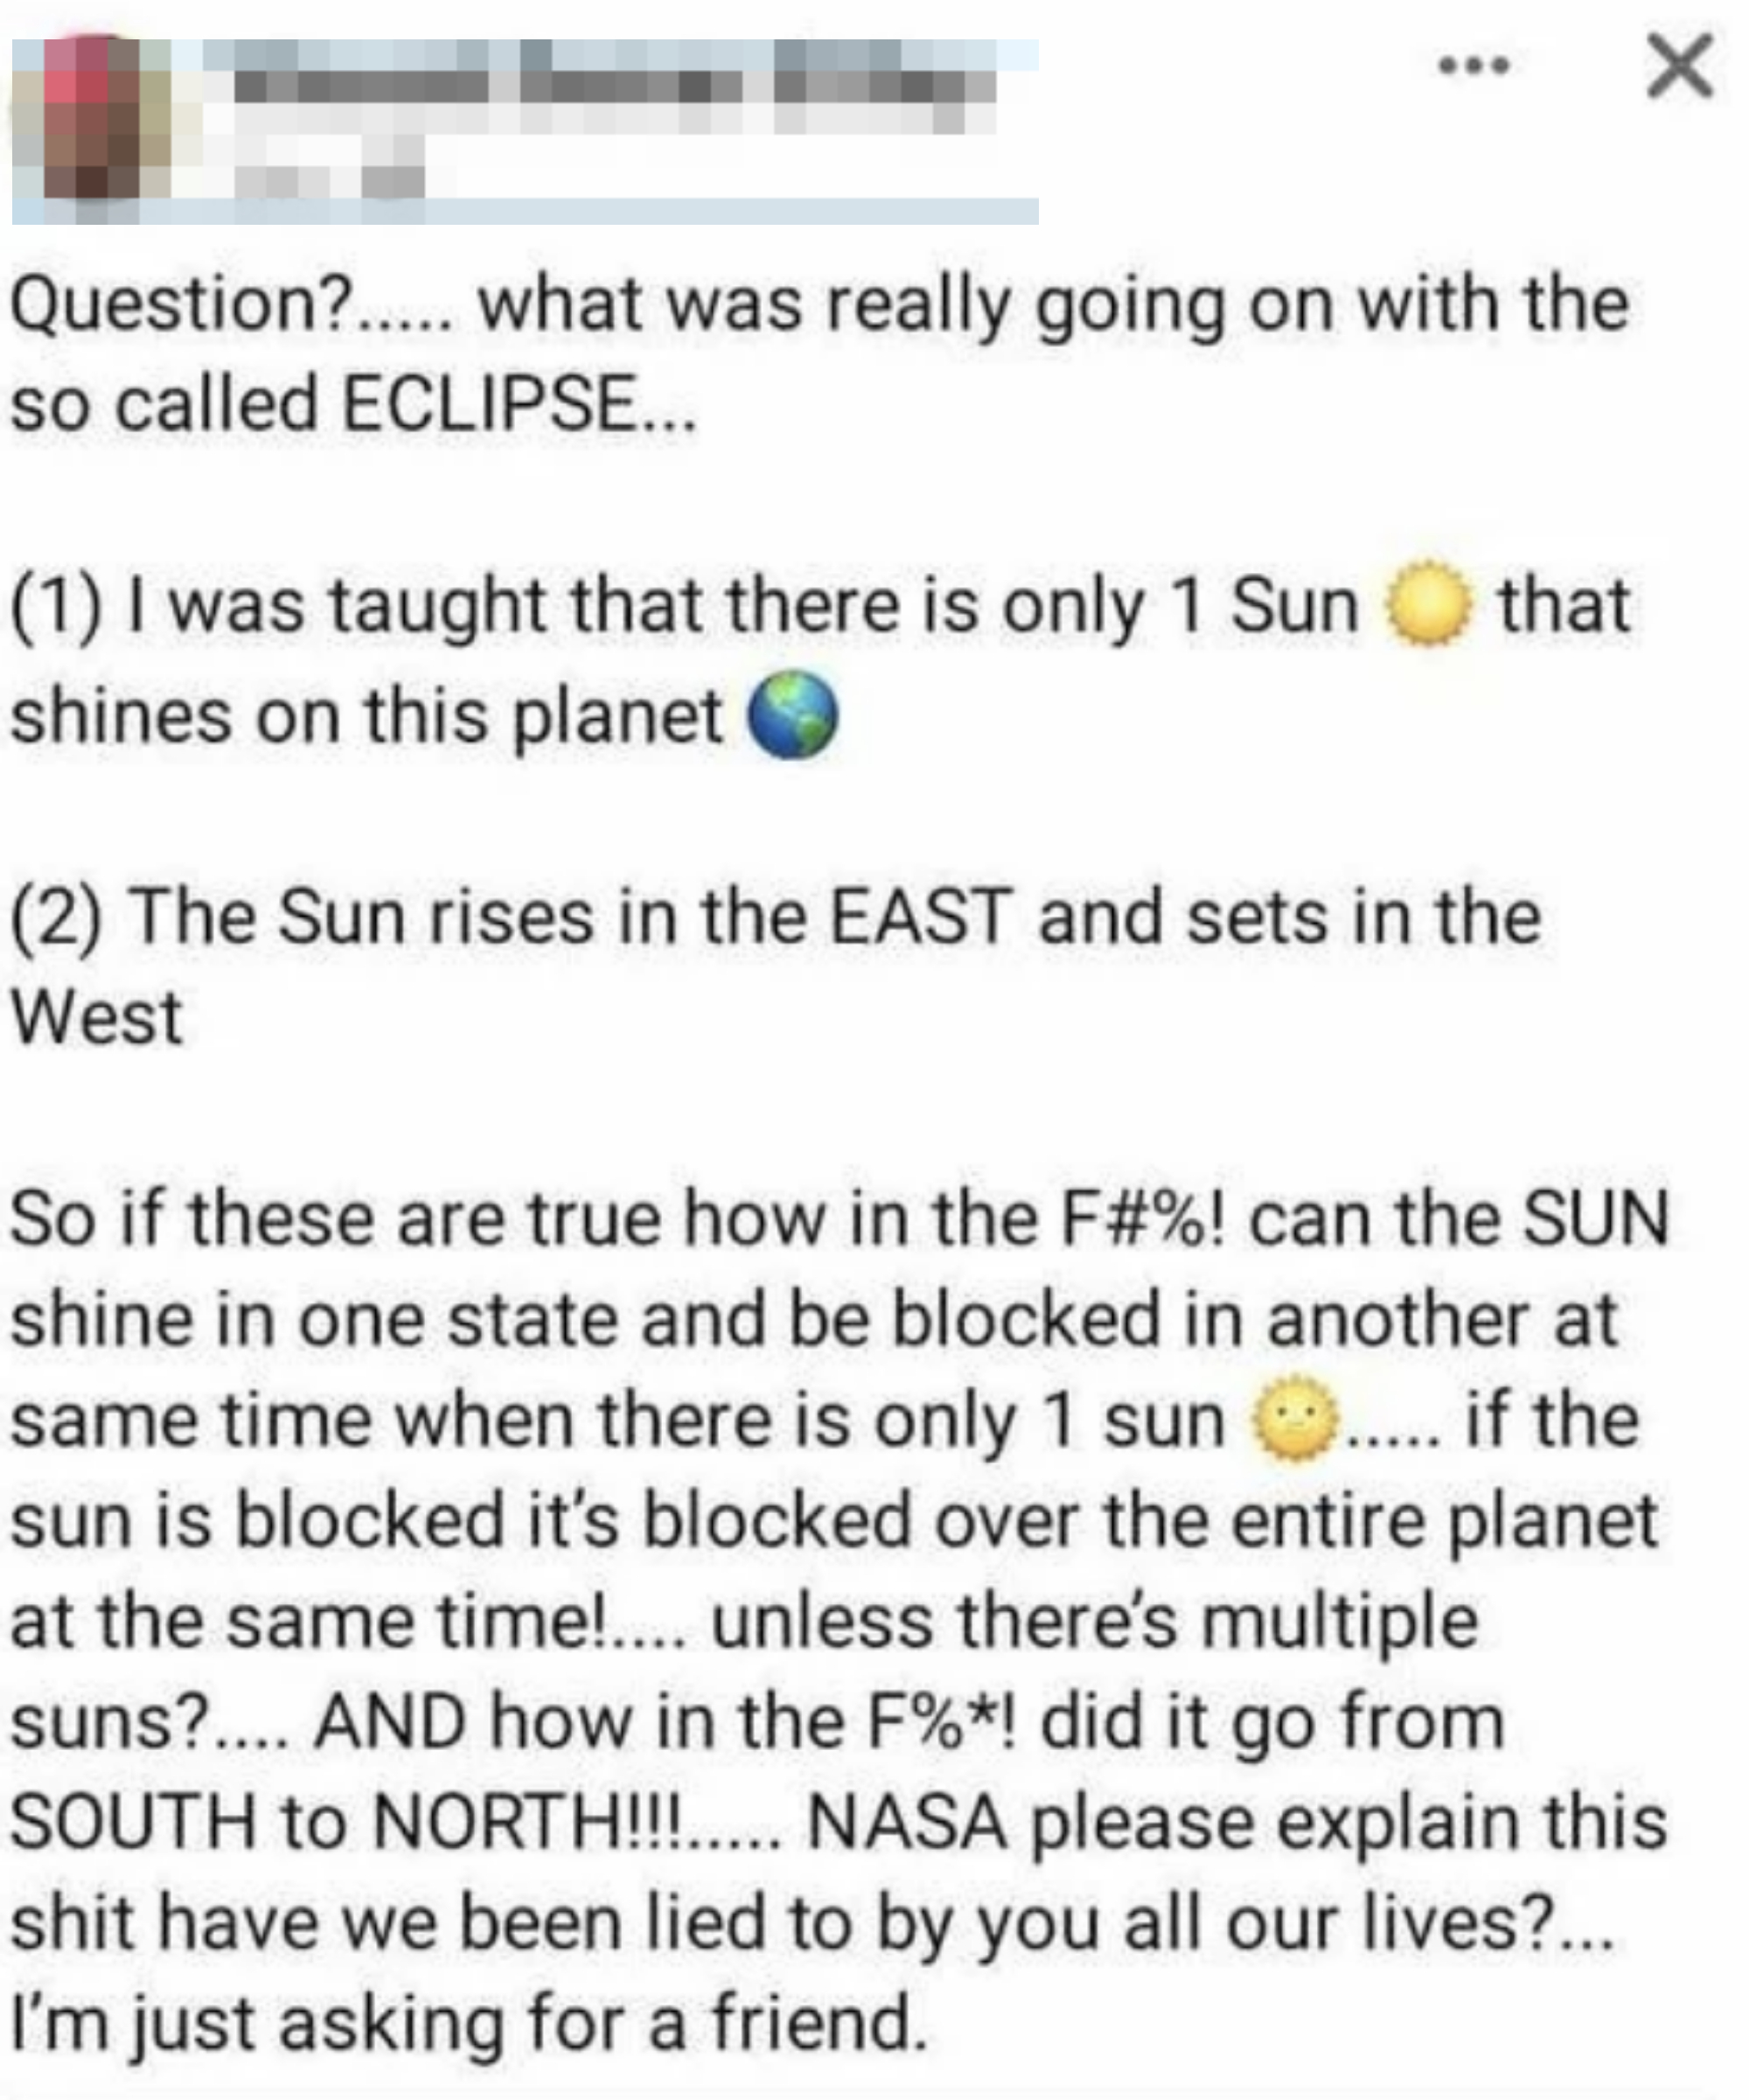 Facebook post with a confused question about the sun setting in the east and rising in the west, and multiple suns